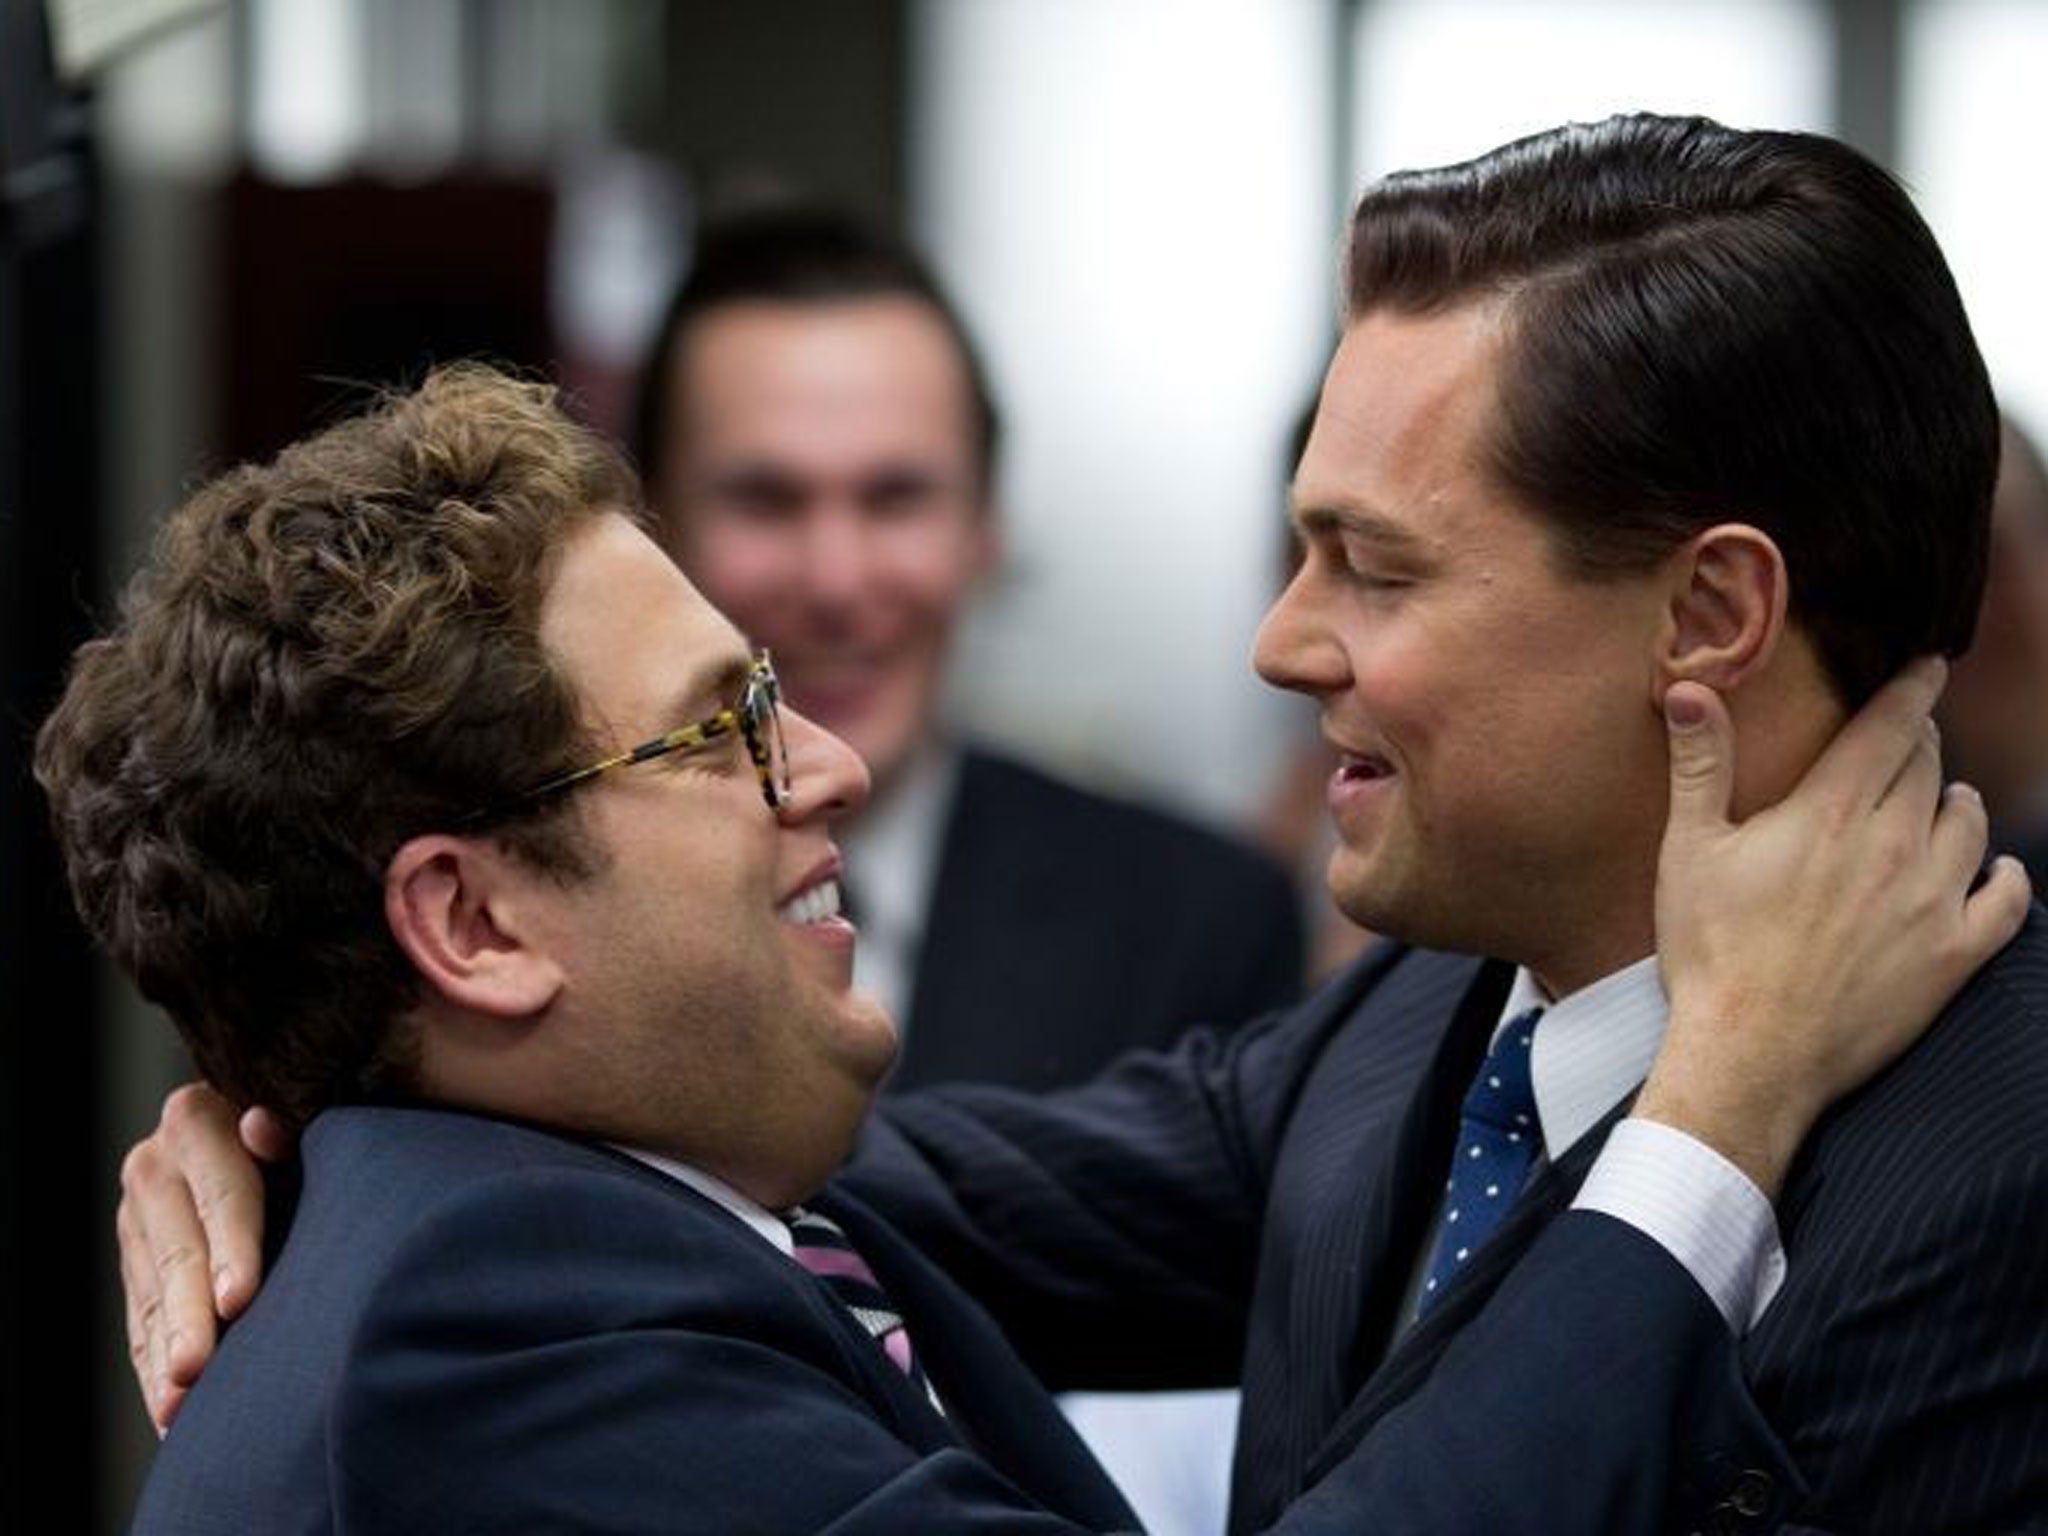 Leo DiCaprio and Jonah Hill star in The Wolf of Wall Street